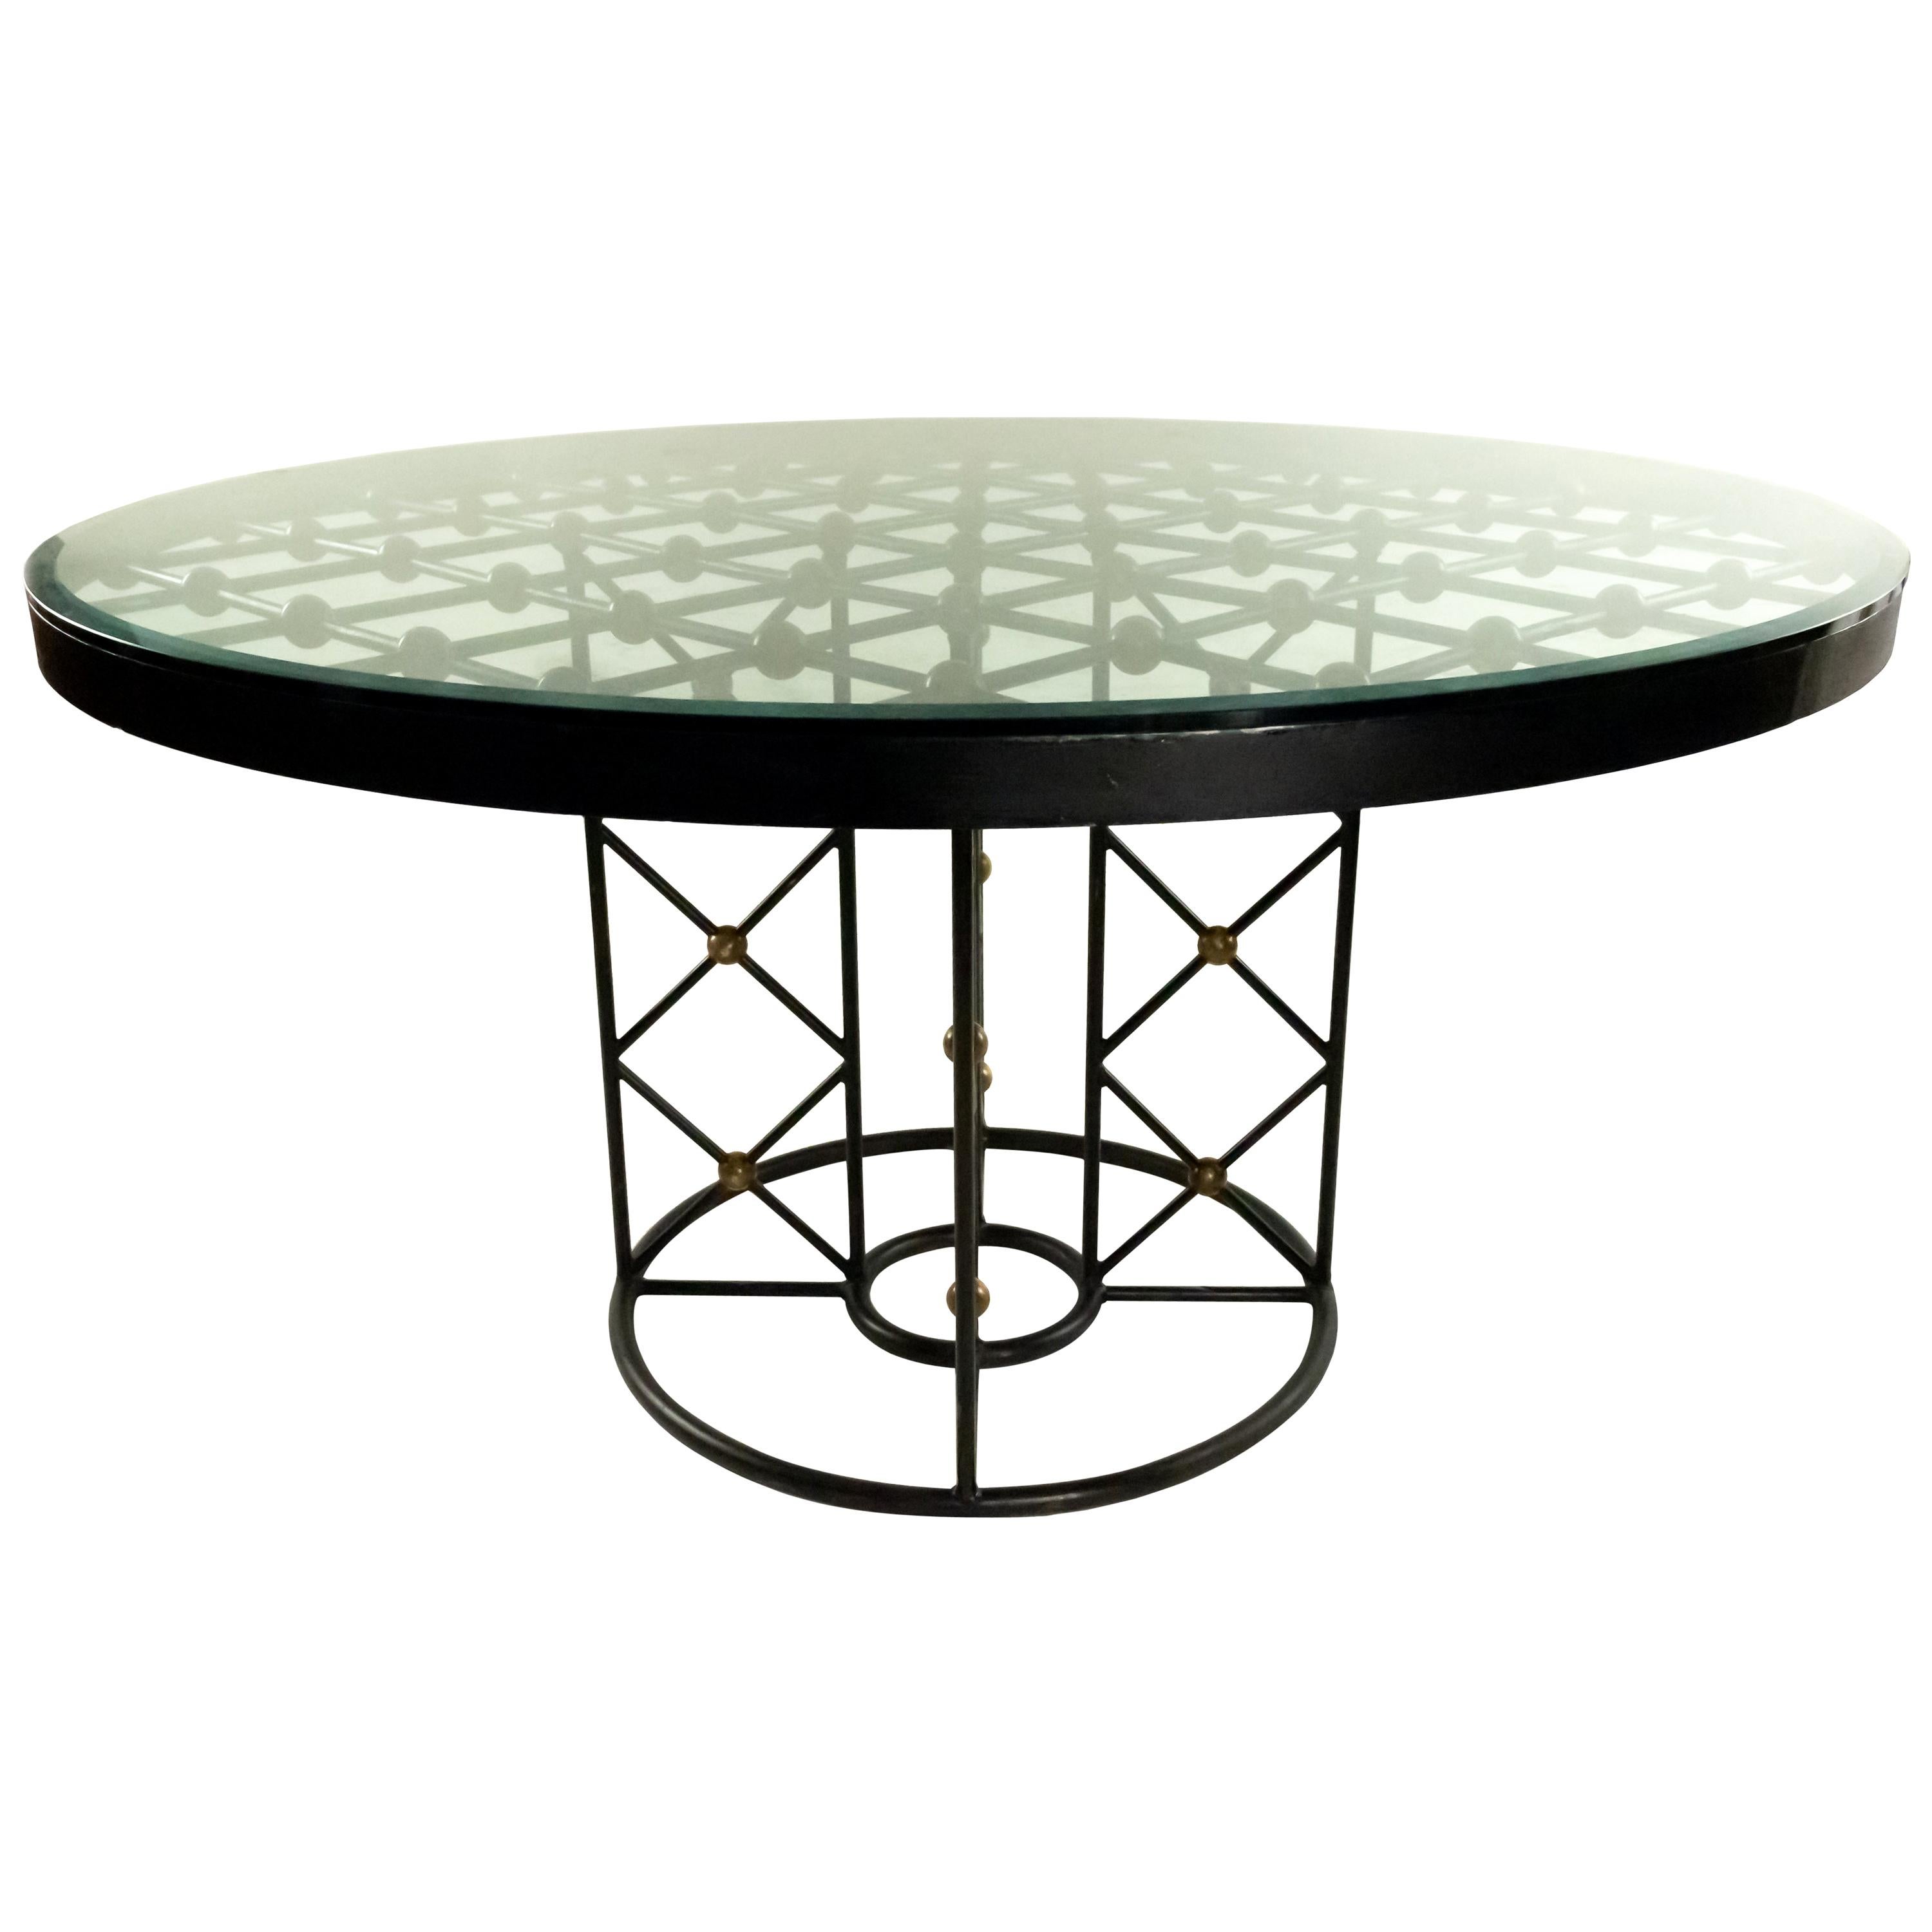 Jean Royère Round Iron Dining Table with Glass Top